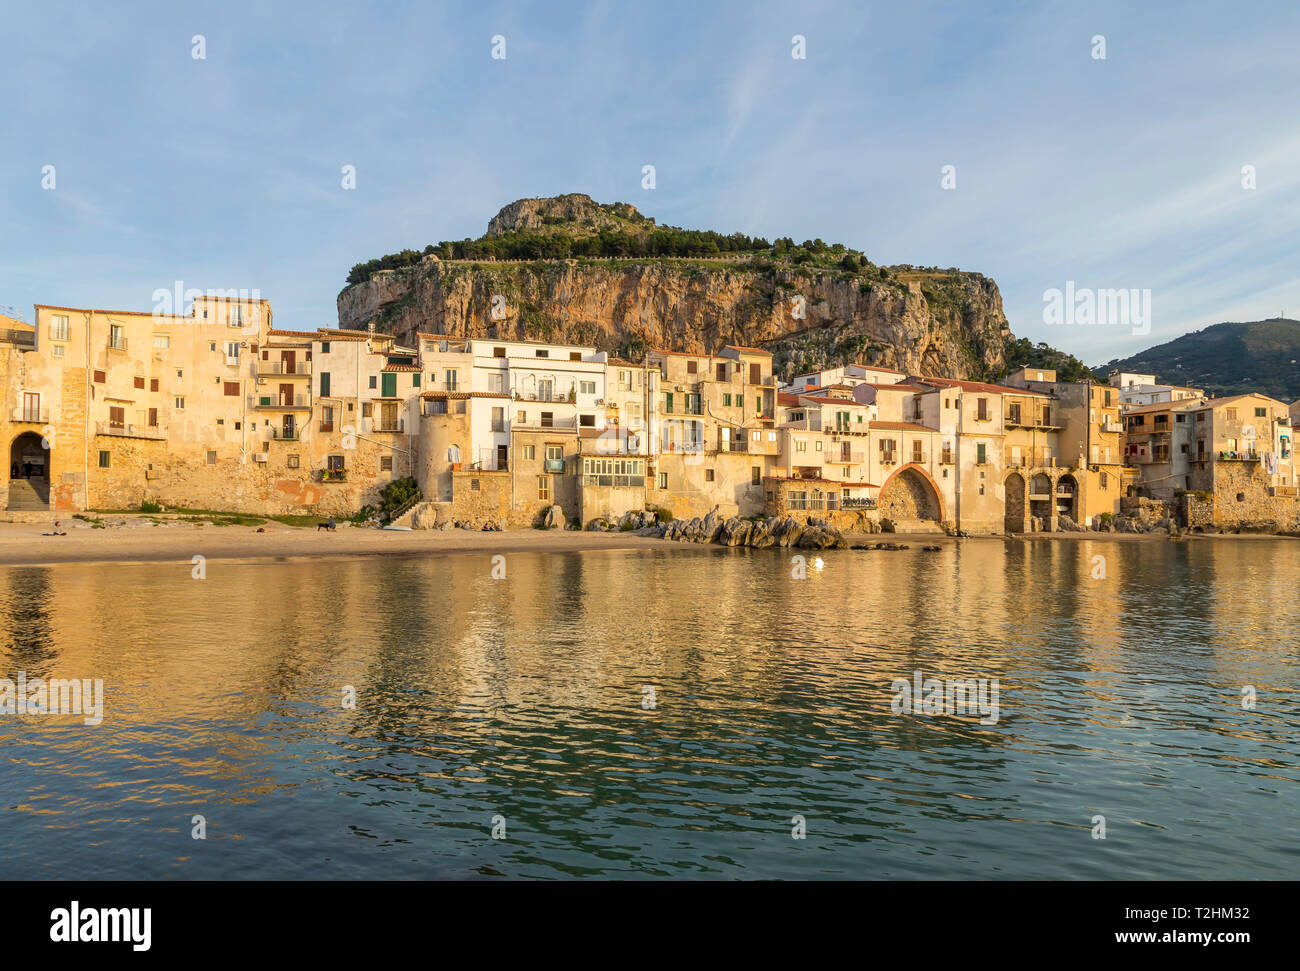 The old town of Cefalu with Rocca di Cefalu in the background, Cefalu, Sicily, Italy, Europe Stock Photo